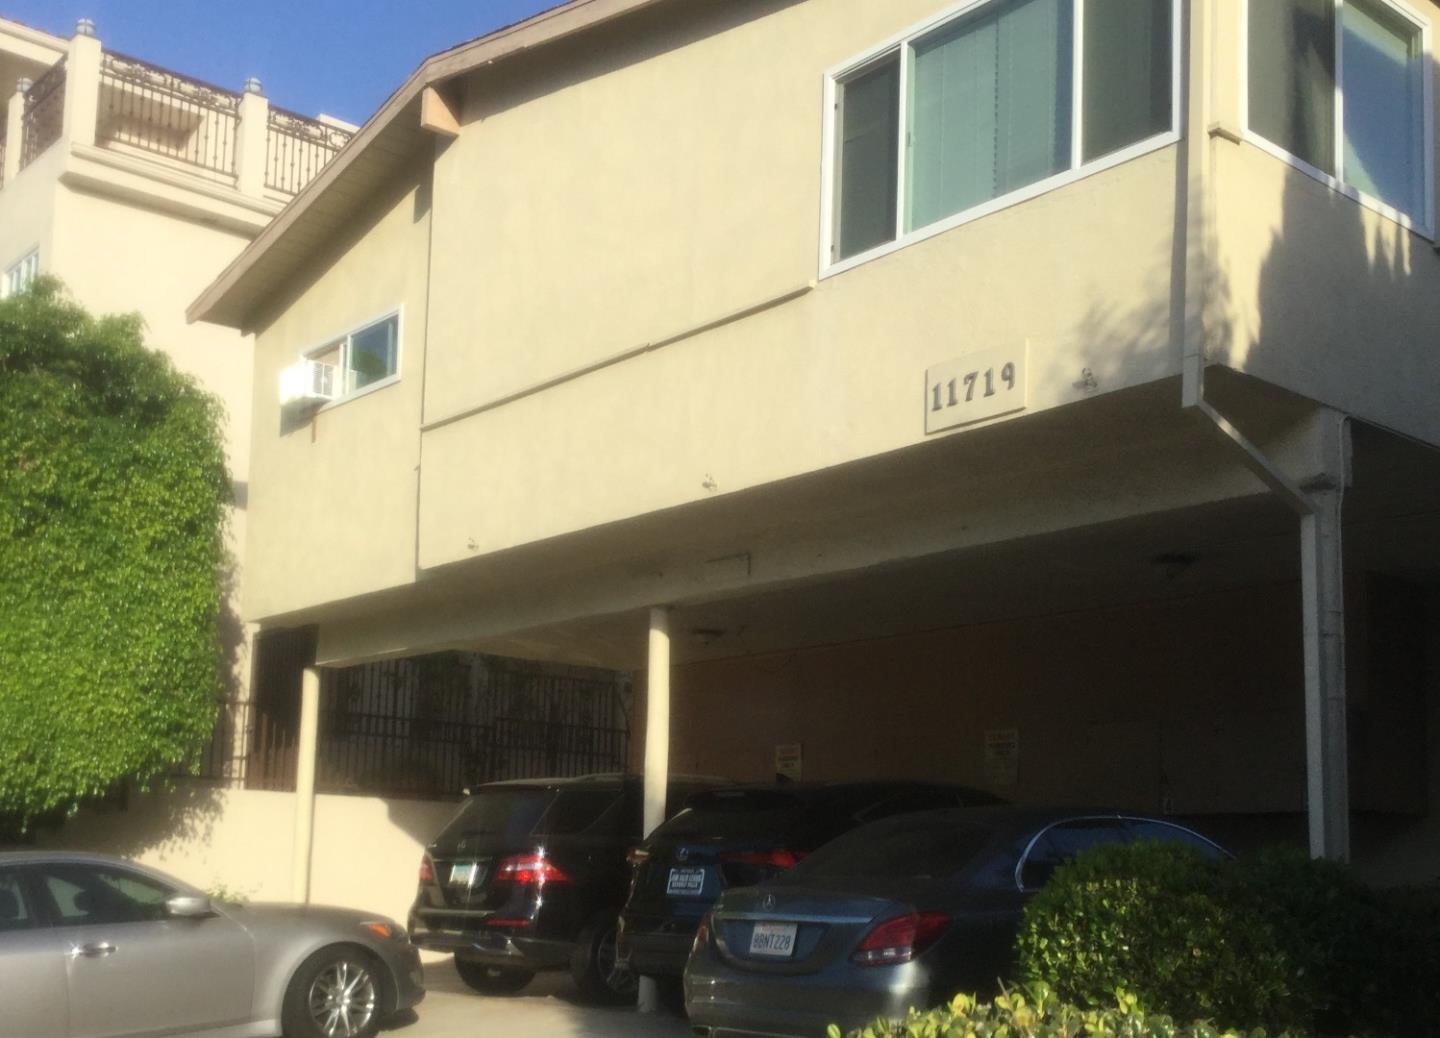 11719 Mayfield Ave Apt 1, Los Angeles, CA 90049